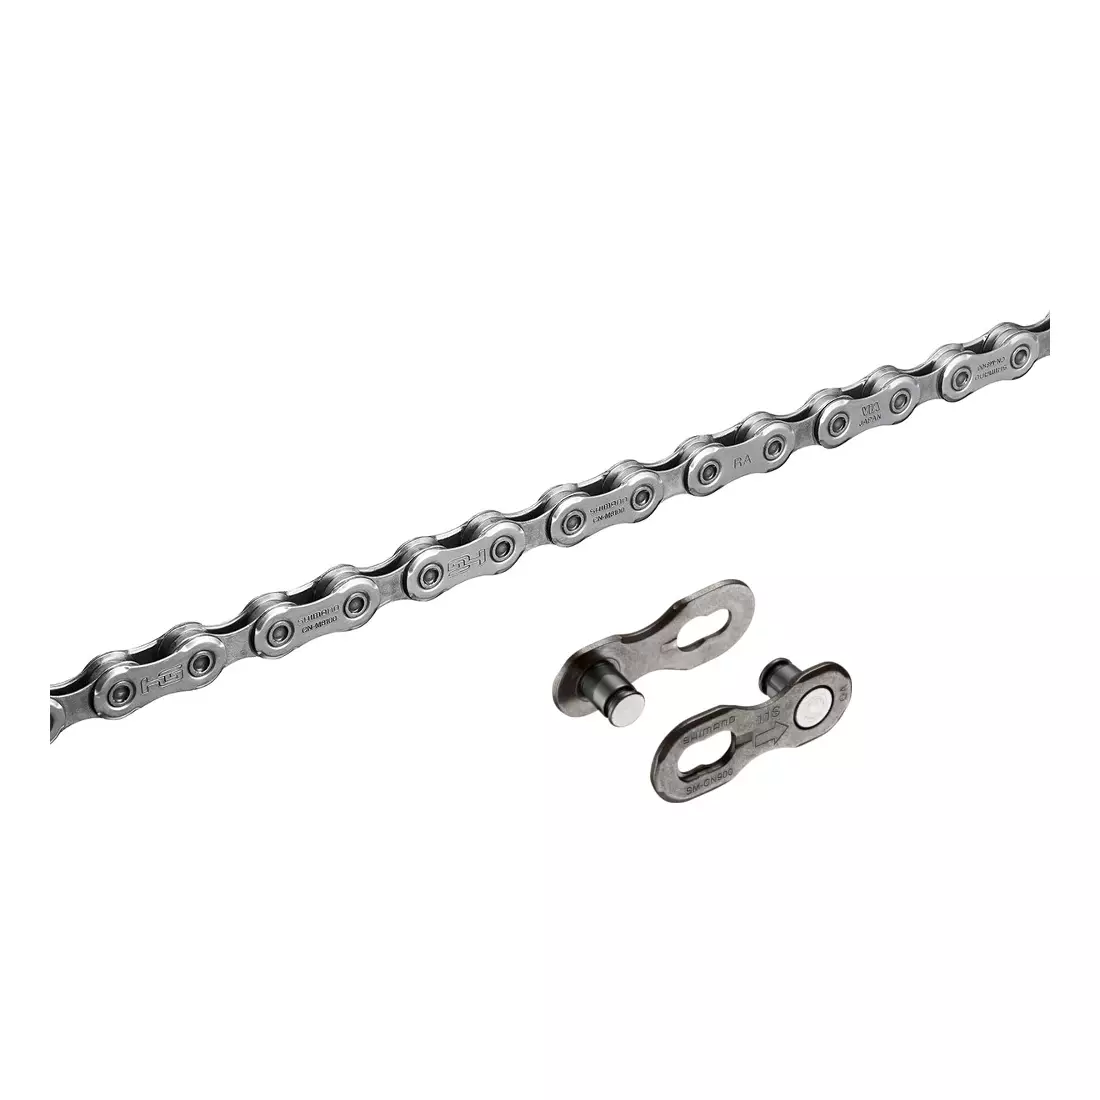 SHIMANO DEORE XT CN-M8100 bicycle chain 12-speed, 126 links, silver